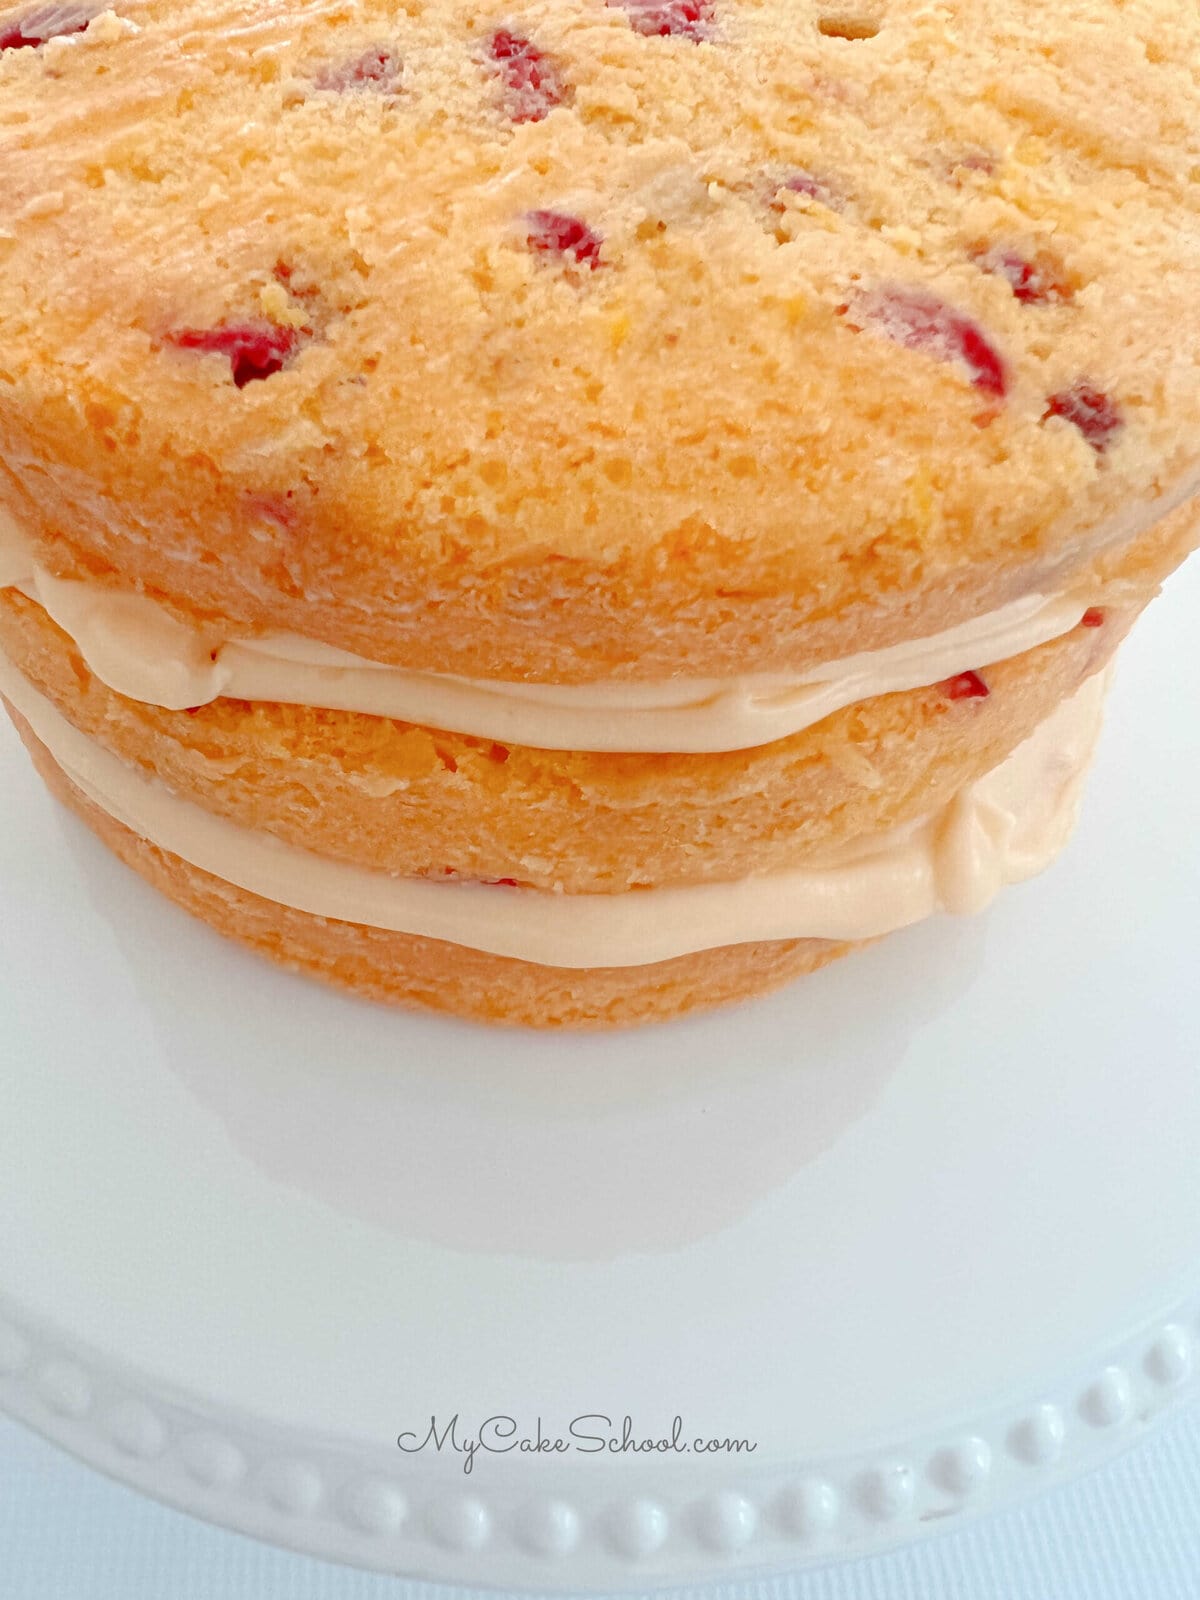 Filled, unfrosted cranberry orange cake.